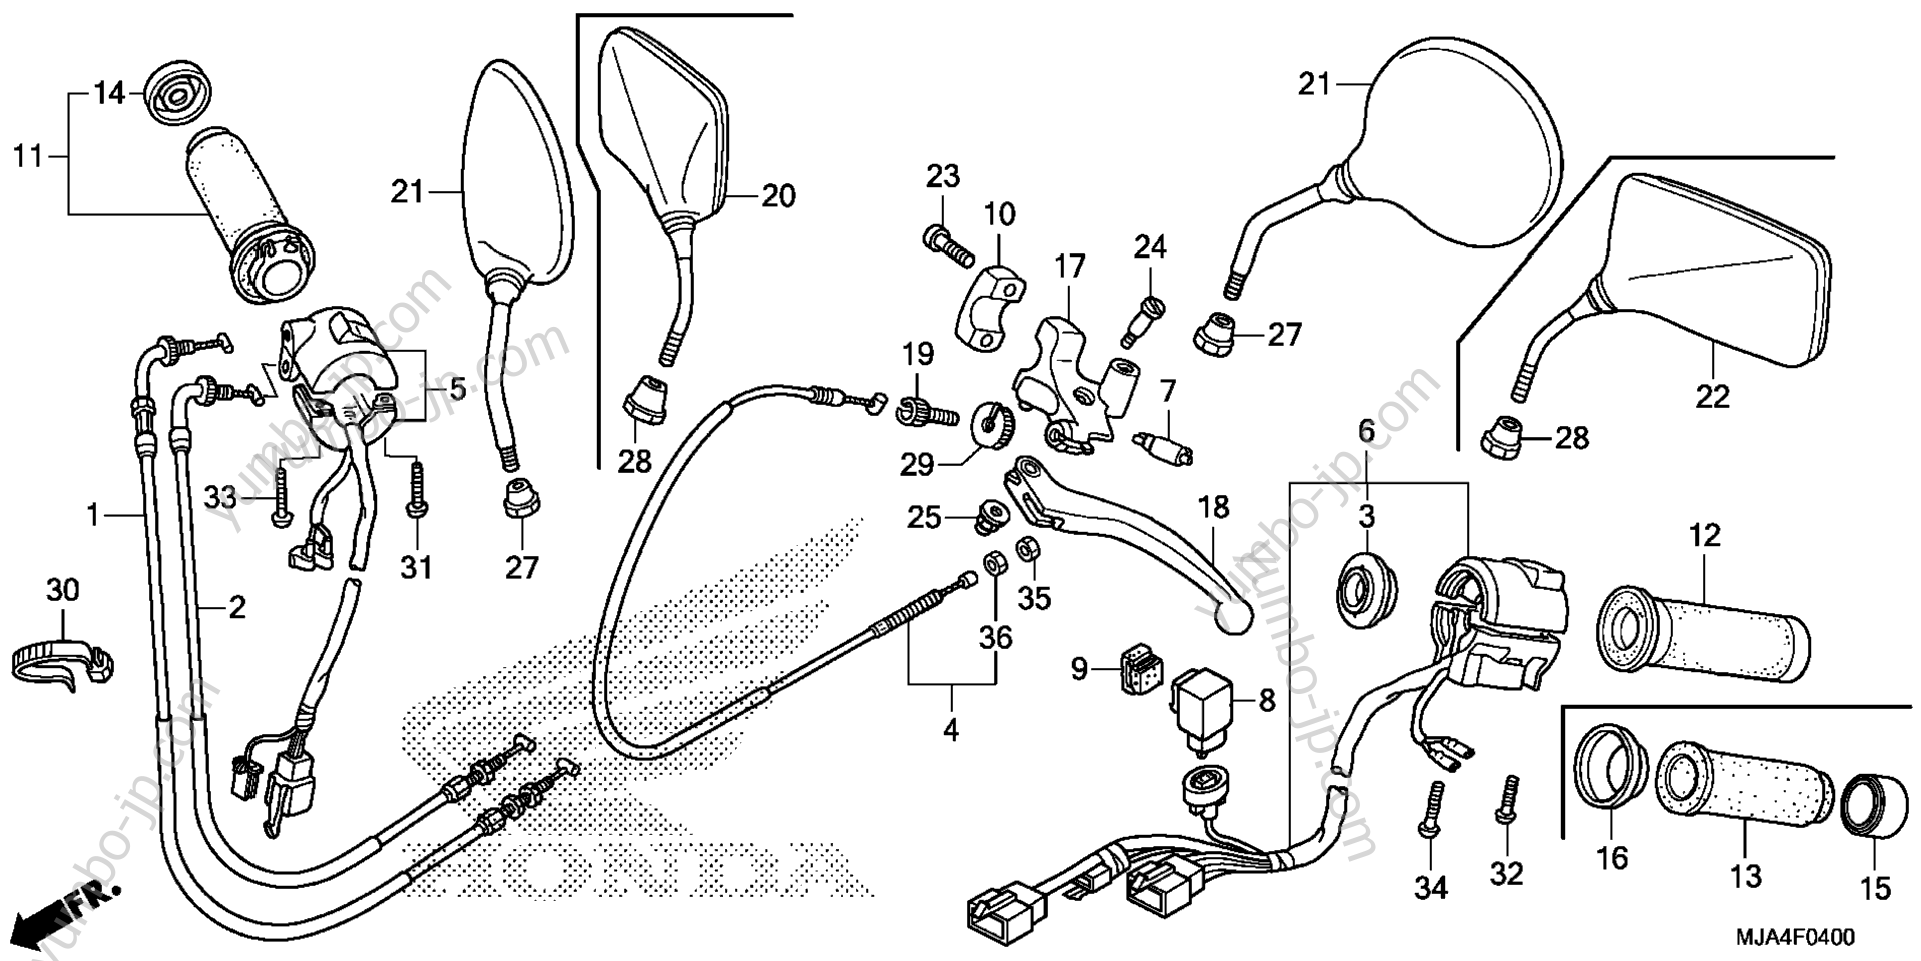 HANDLE LEVER / SWITCH / CABLE for motorcycles HONDA VT750CA A 2012 year